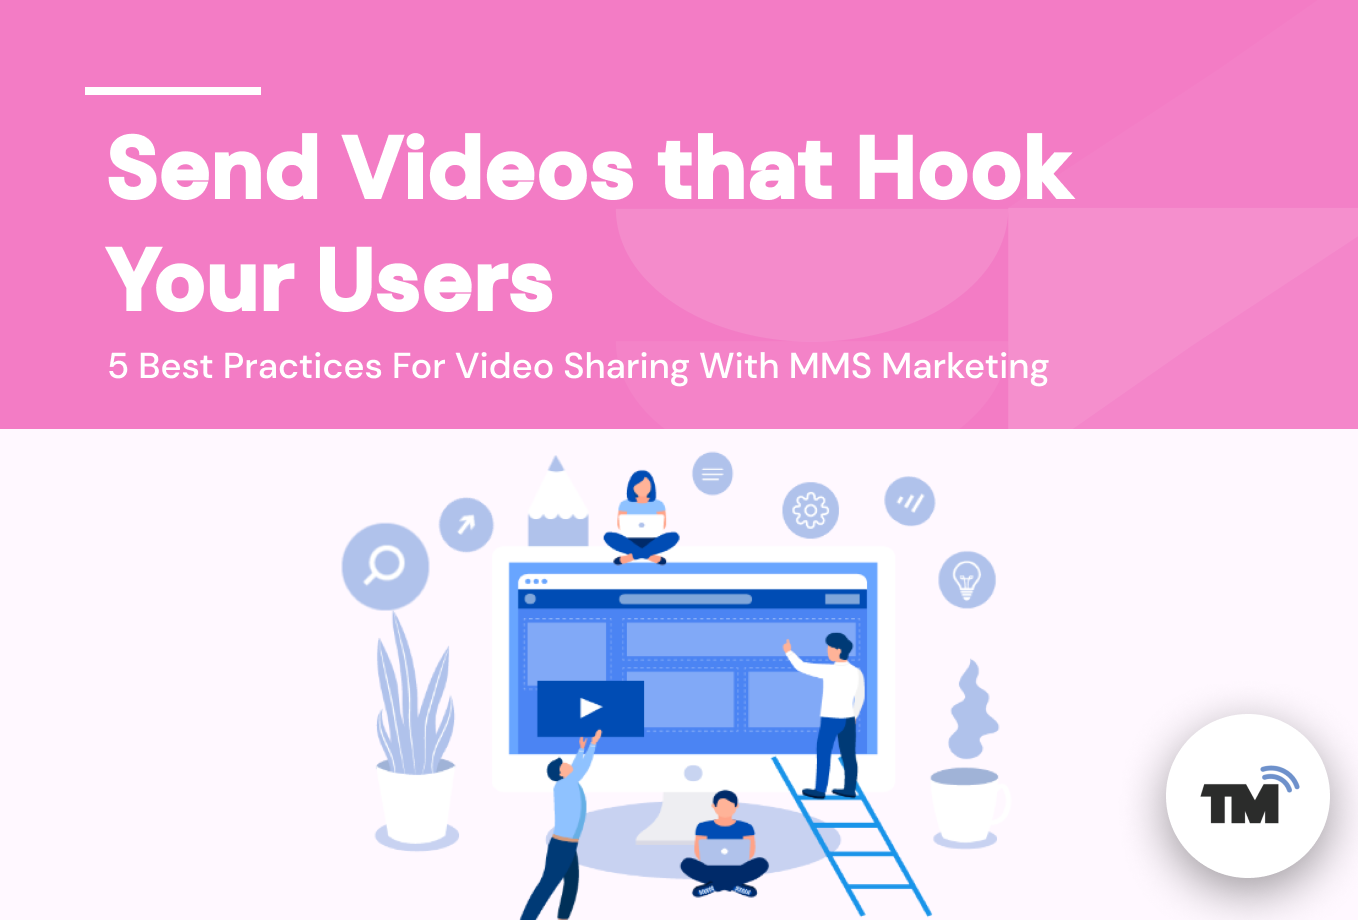 5 Best Practices For Video Sharing With MMS Marketing